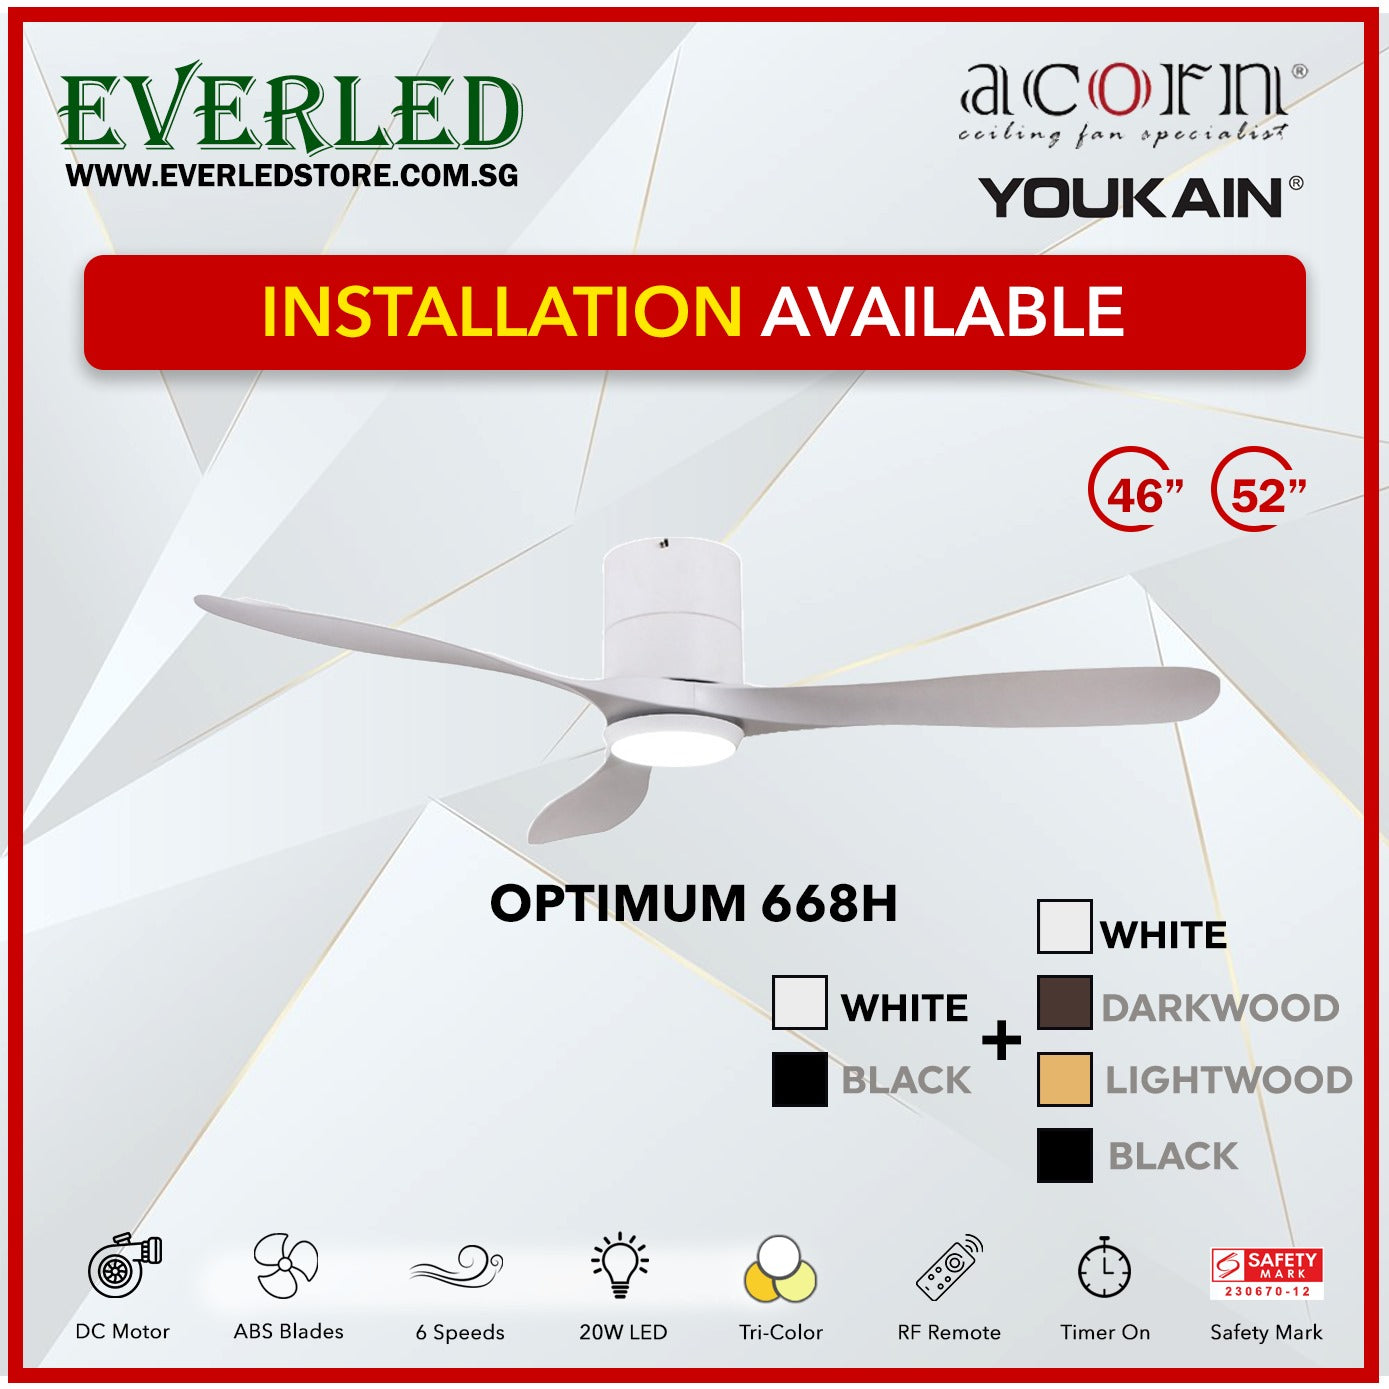 *INSTALLATION AVAILABLE* Acorn (Youkain) *SMART DC INVERTER* Optimum 668H 46"/52"  with Tri-color LED